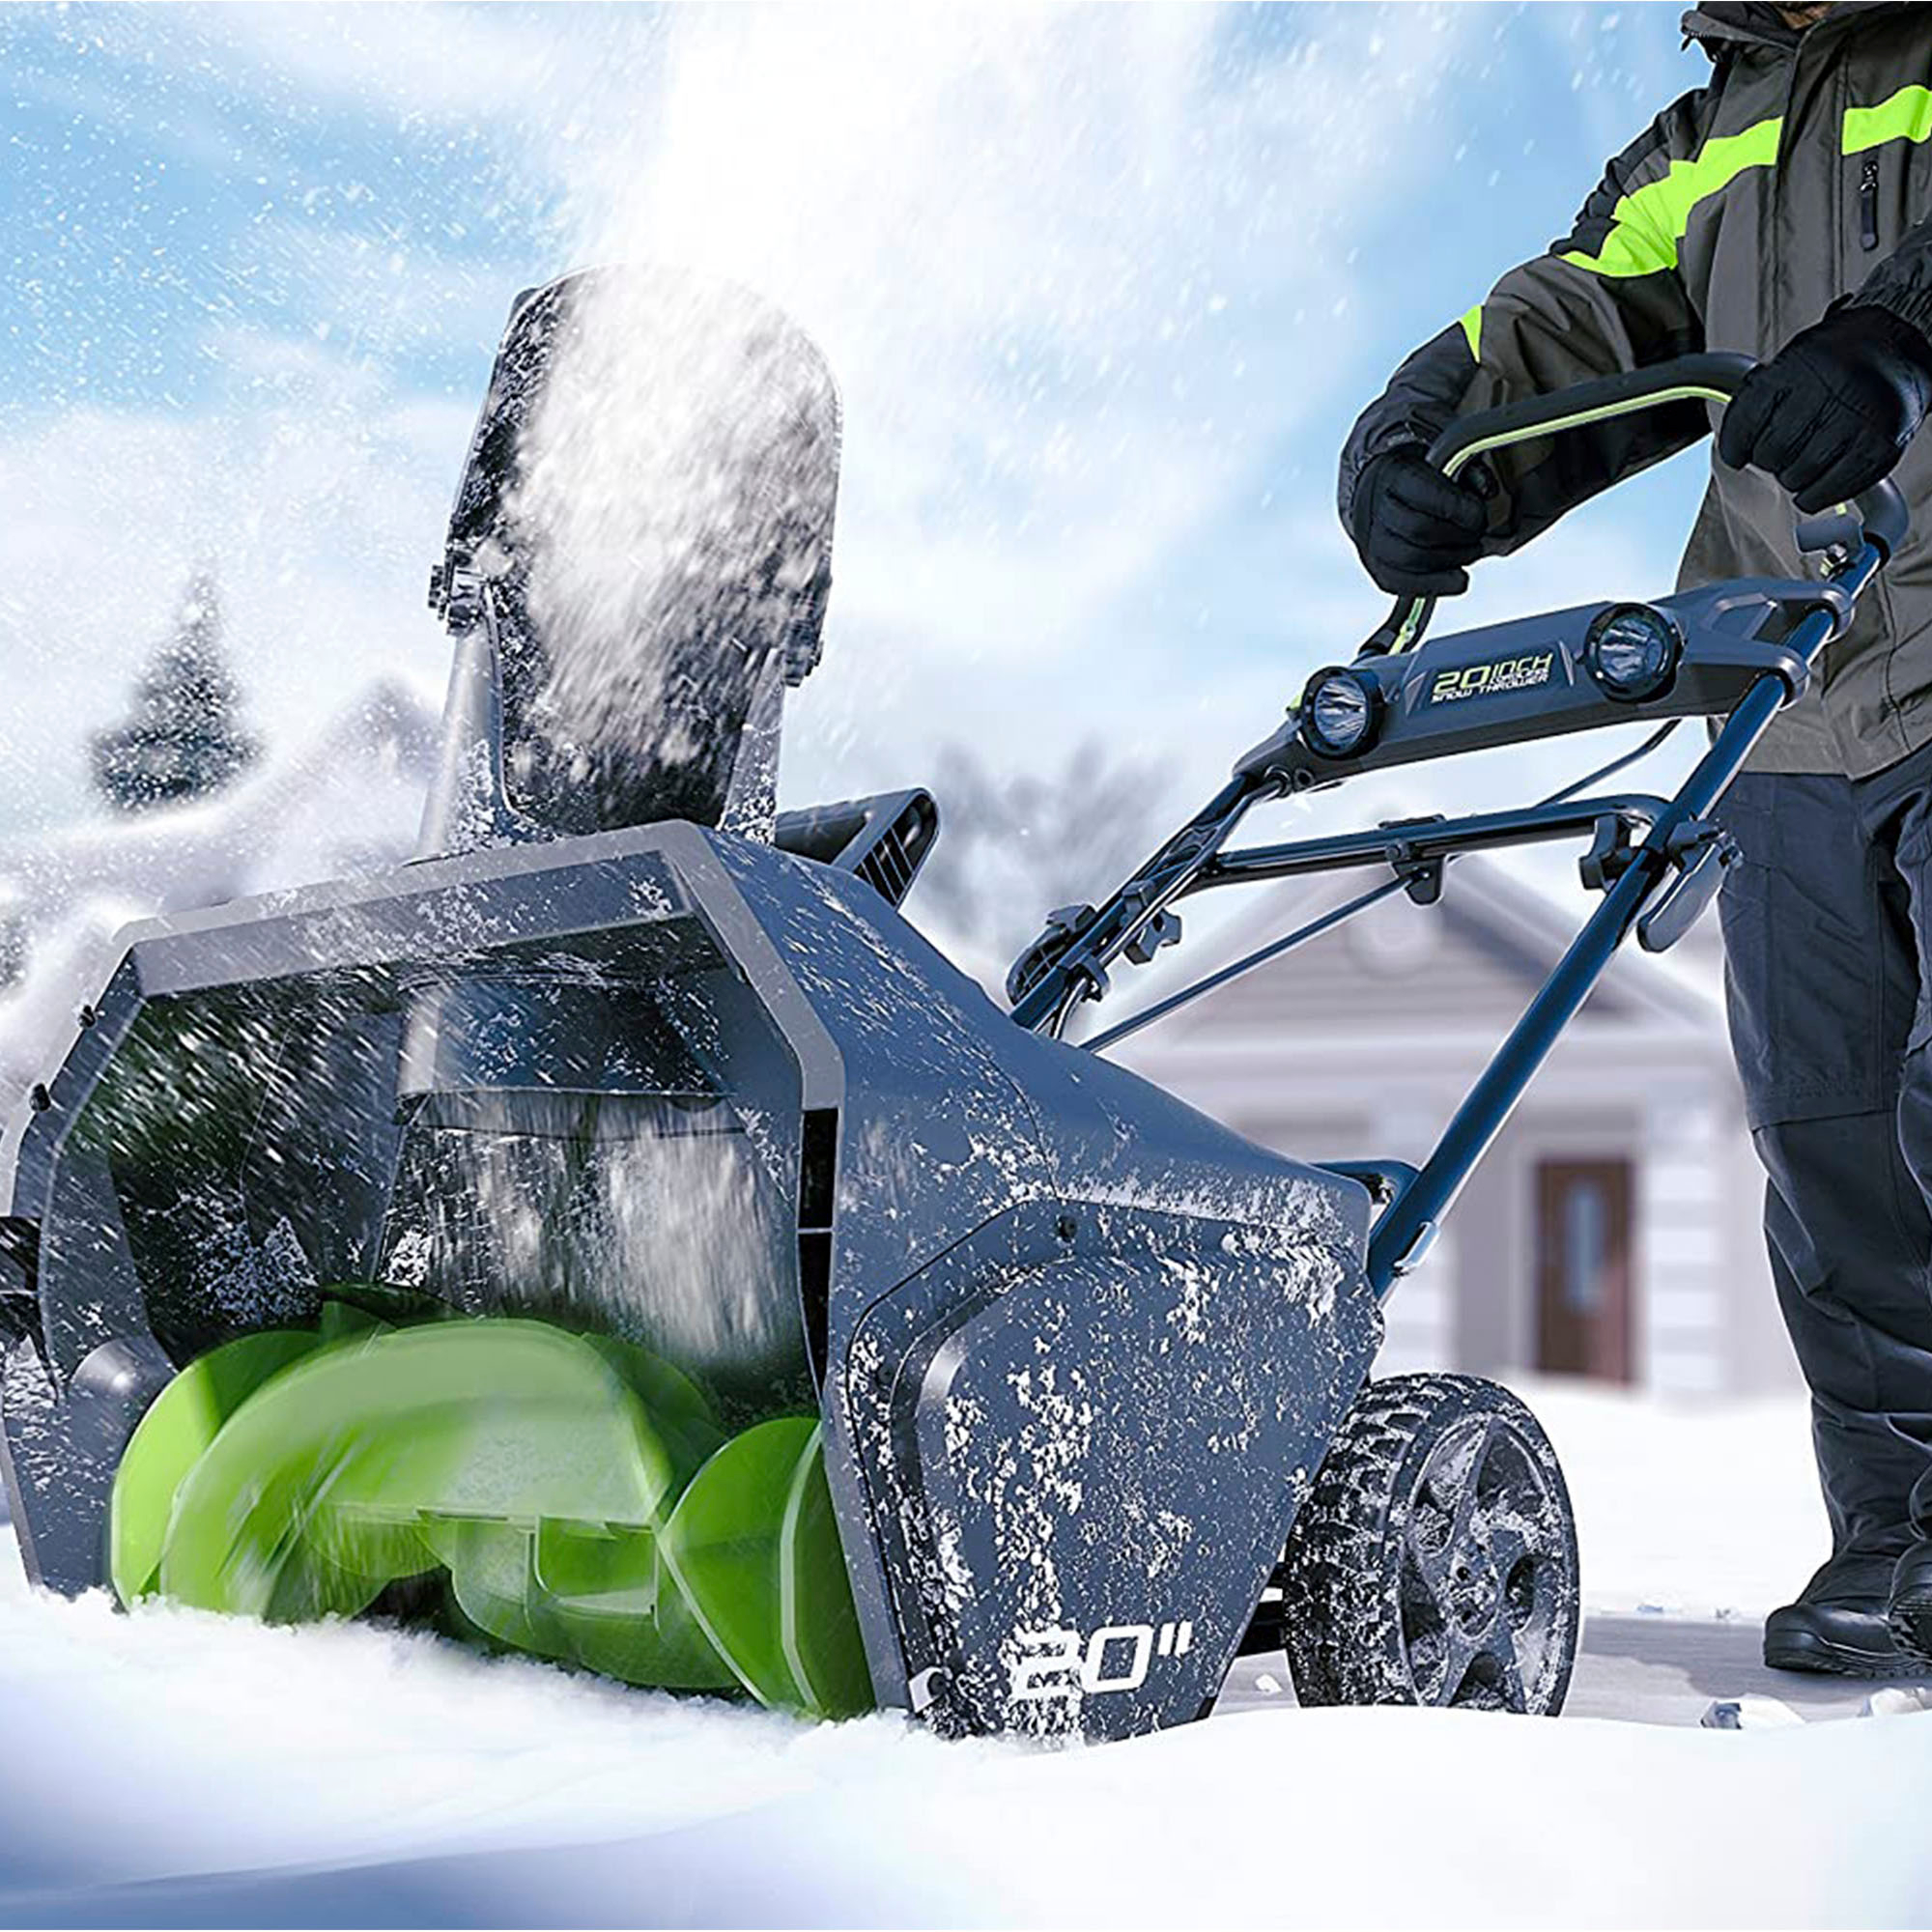 Left View: Greenworks - 80 Volt 20-Inch Single Stage Cordless Brushless Snow Blower (1 x 2Ah Battery 1 x Charger) - Black/Green